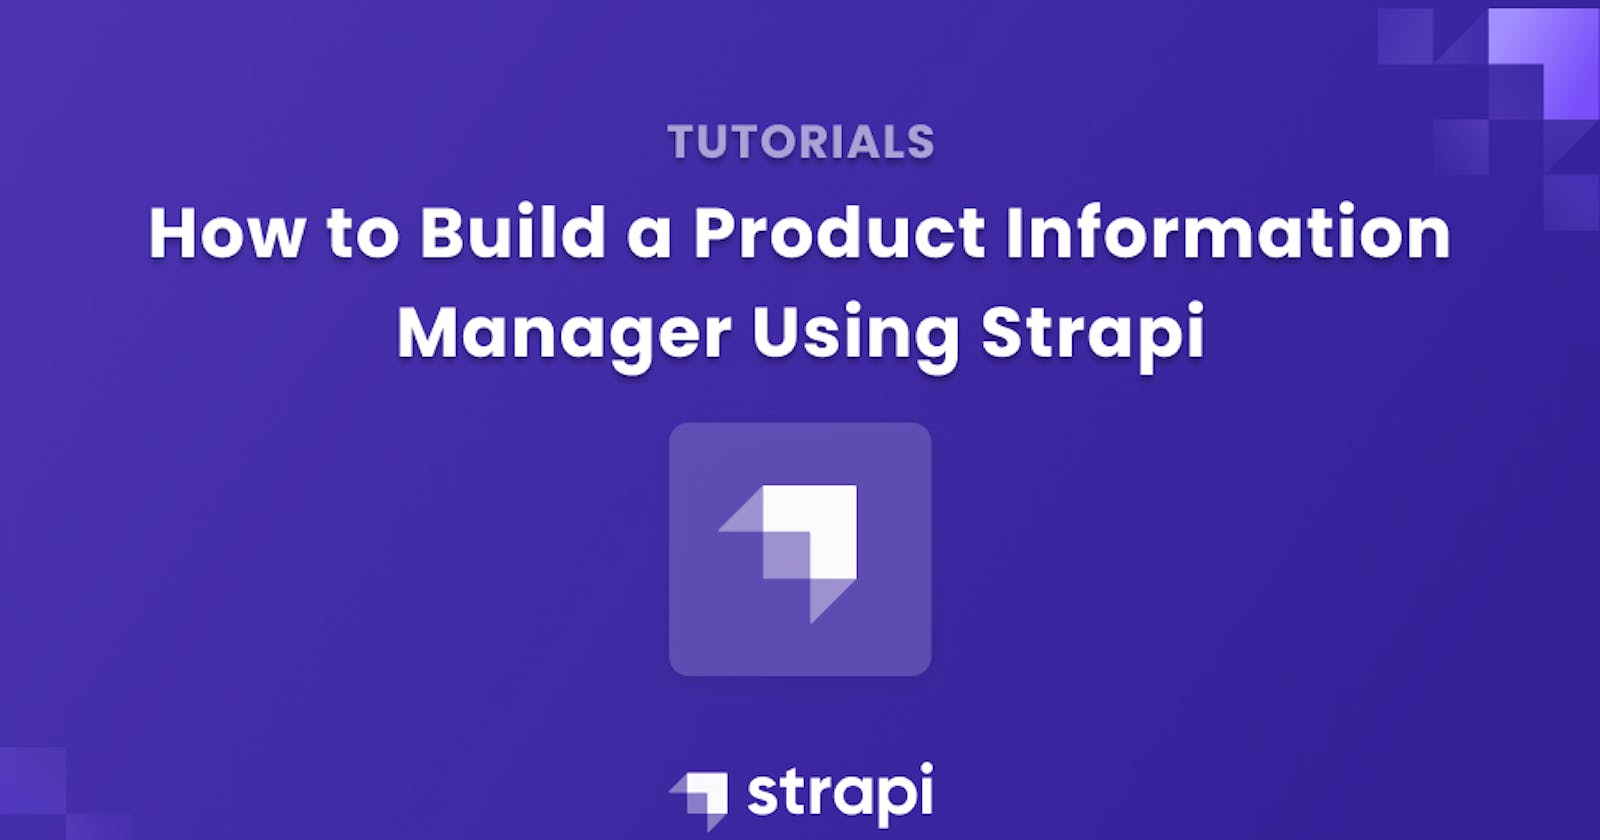 How to Build a Product Information Manager Using Strapi